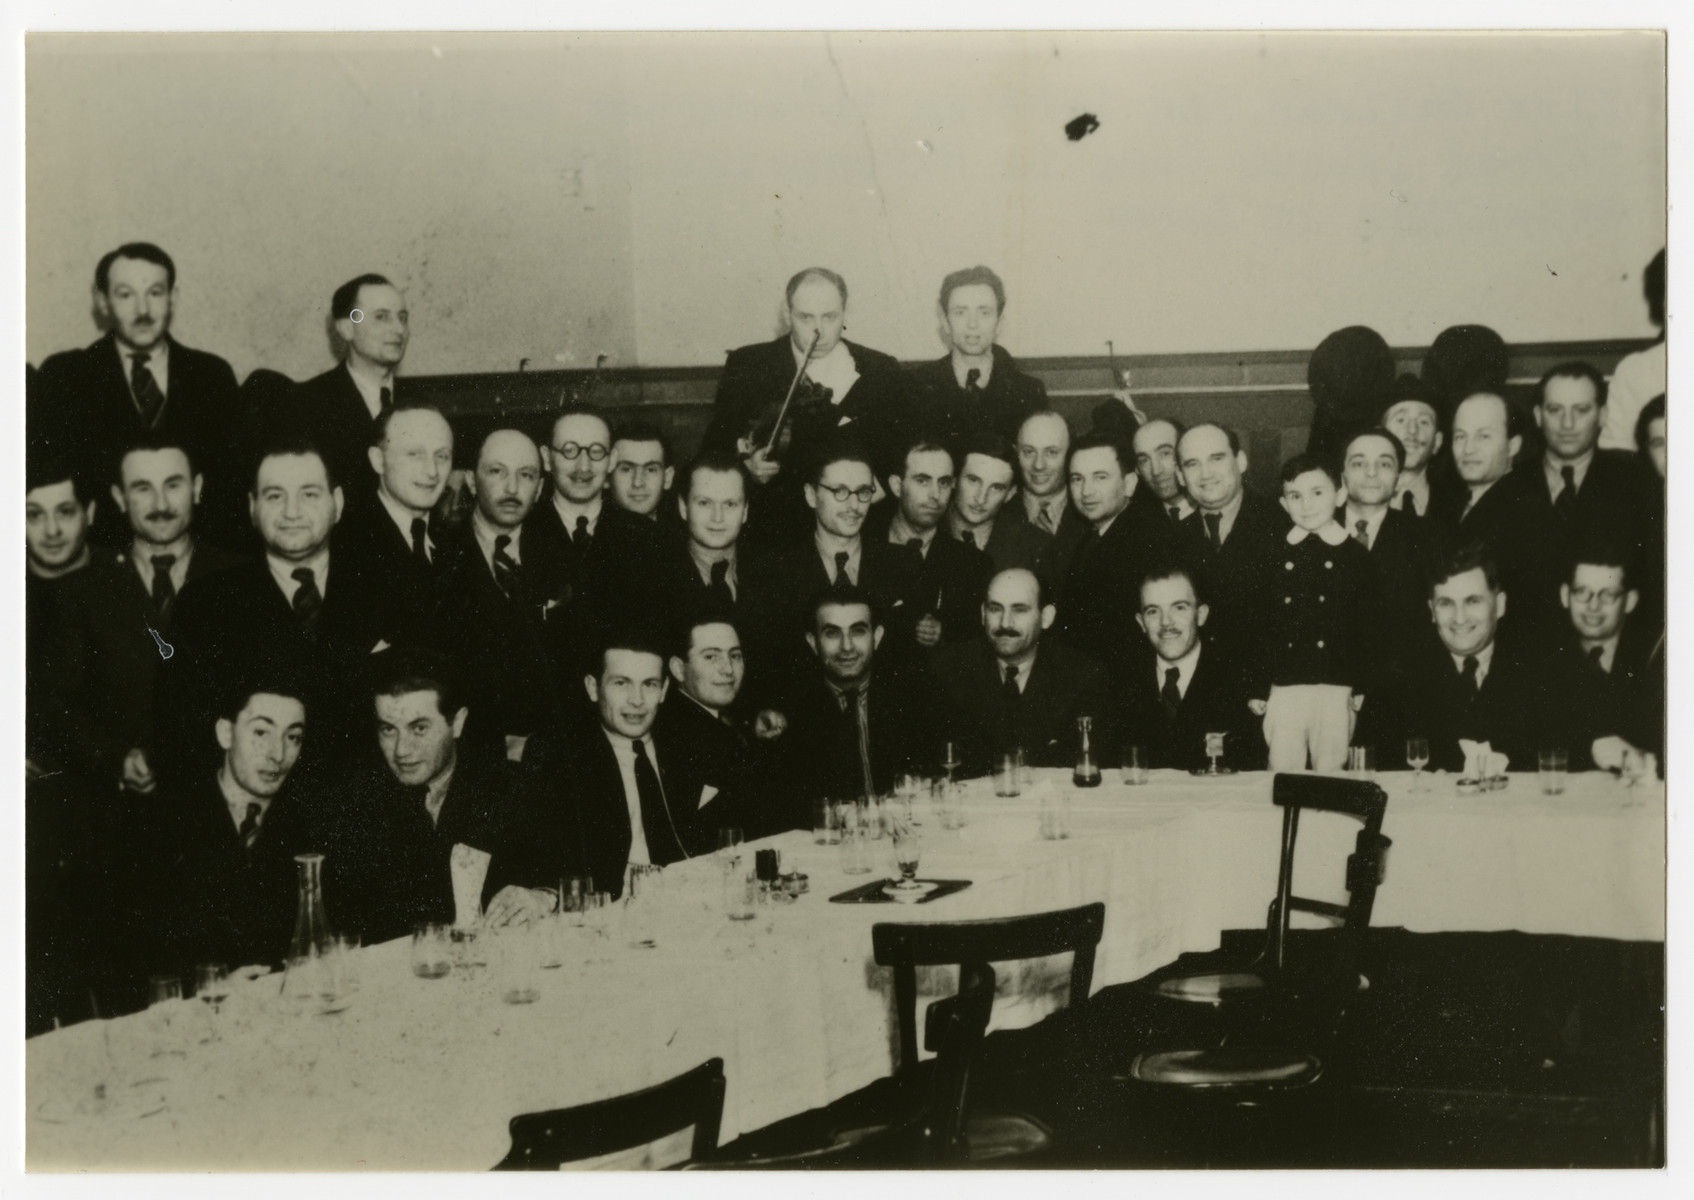 Hungarian Jewish men who had served together in the Sarospatak labor camp gather for a meeting at the Hotel Schalkhaz in Kosice.

Alex Gellman is pictured in the middle row, second from the left.